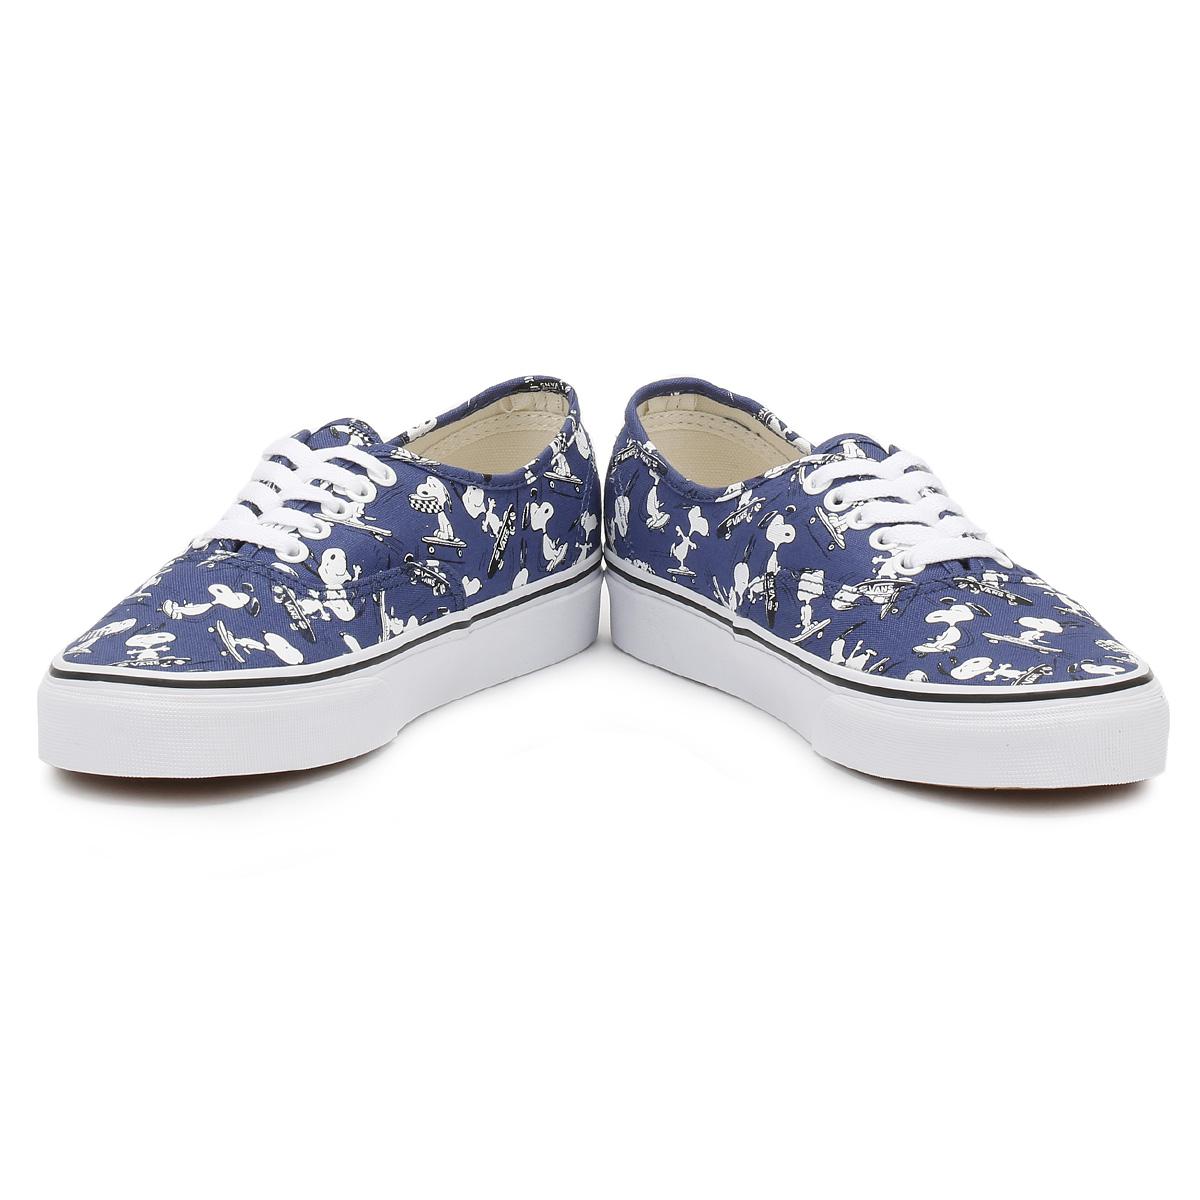 Vans Canvas Peanuts Snoopy/skating Authentic Trainers in Blue - Lyst